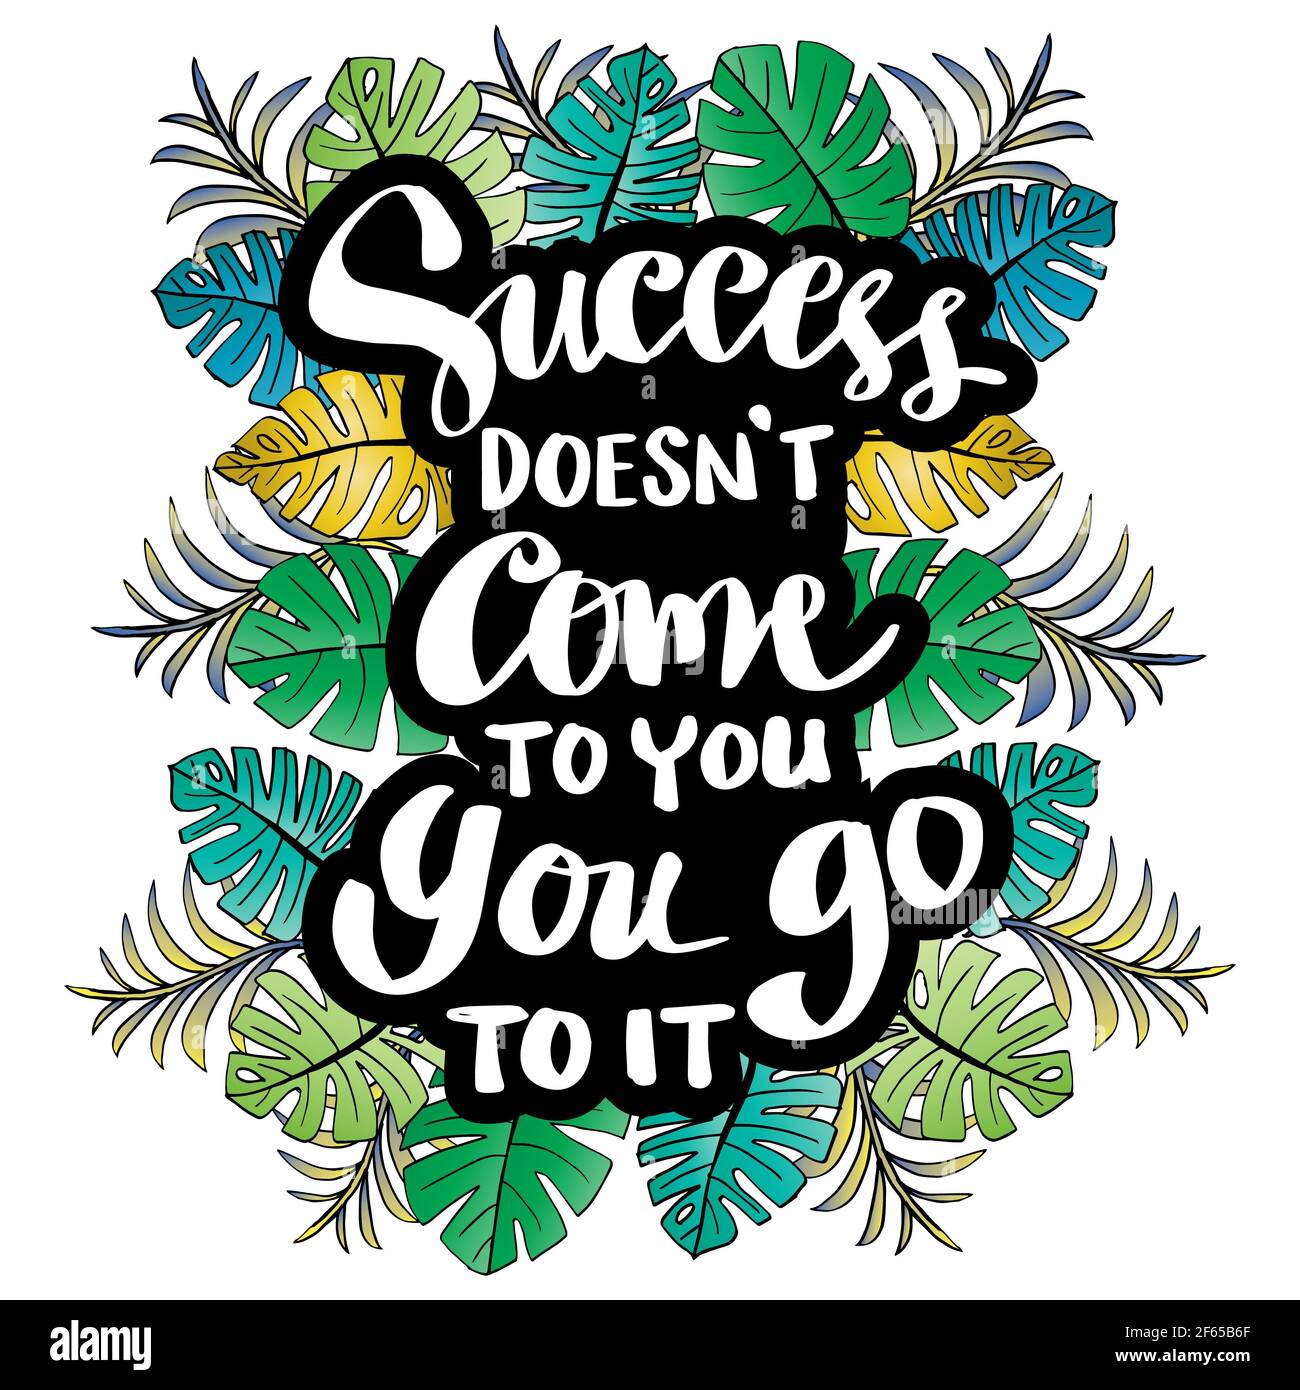 Success doesn`t come to you, you go to it. Inspirational motivational quote. Stock Photo